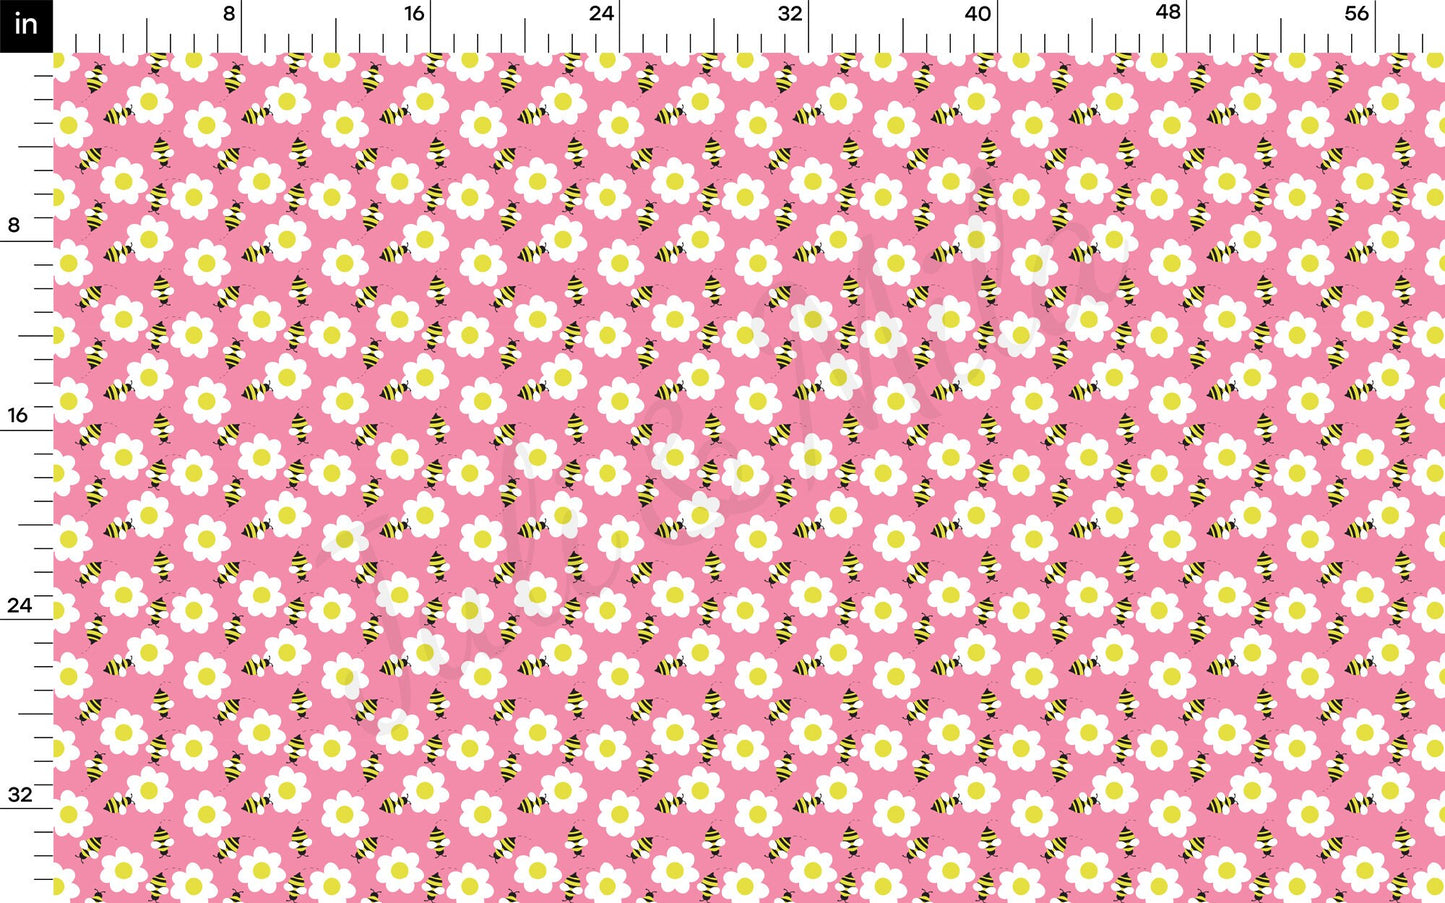 Bee Daisy  Bullet Textured Fabric by the yard Fabric AA1561